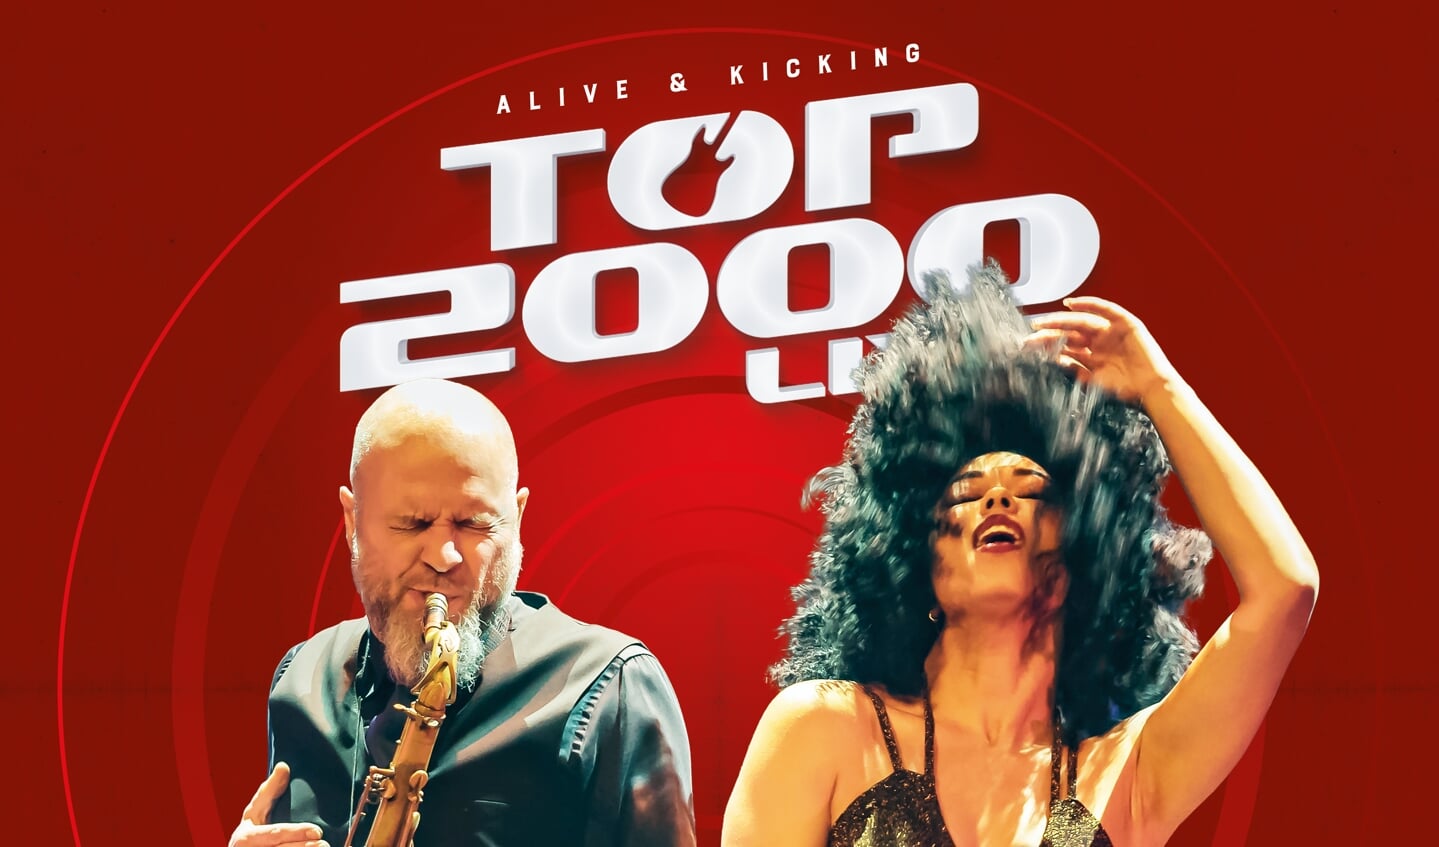 Top 2000 live - Alive and kicking